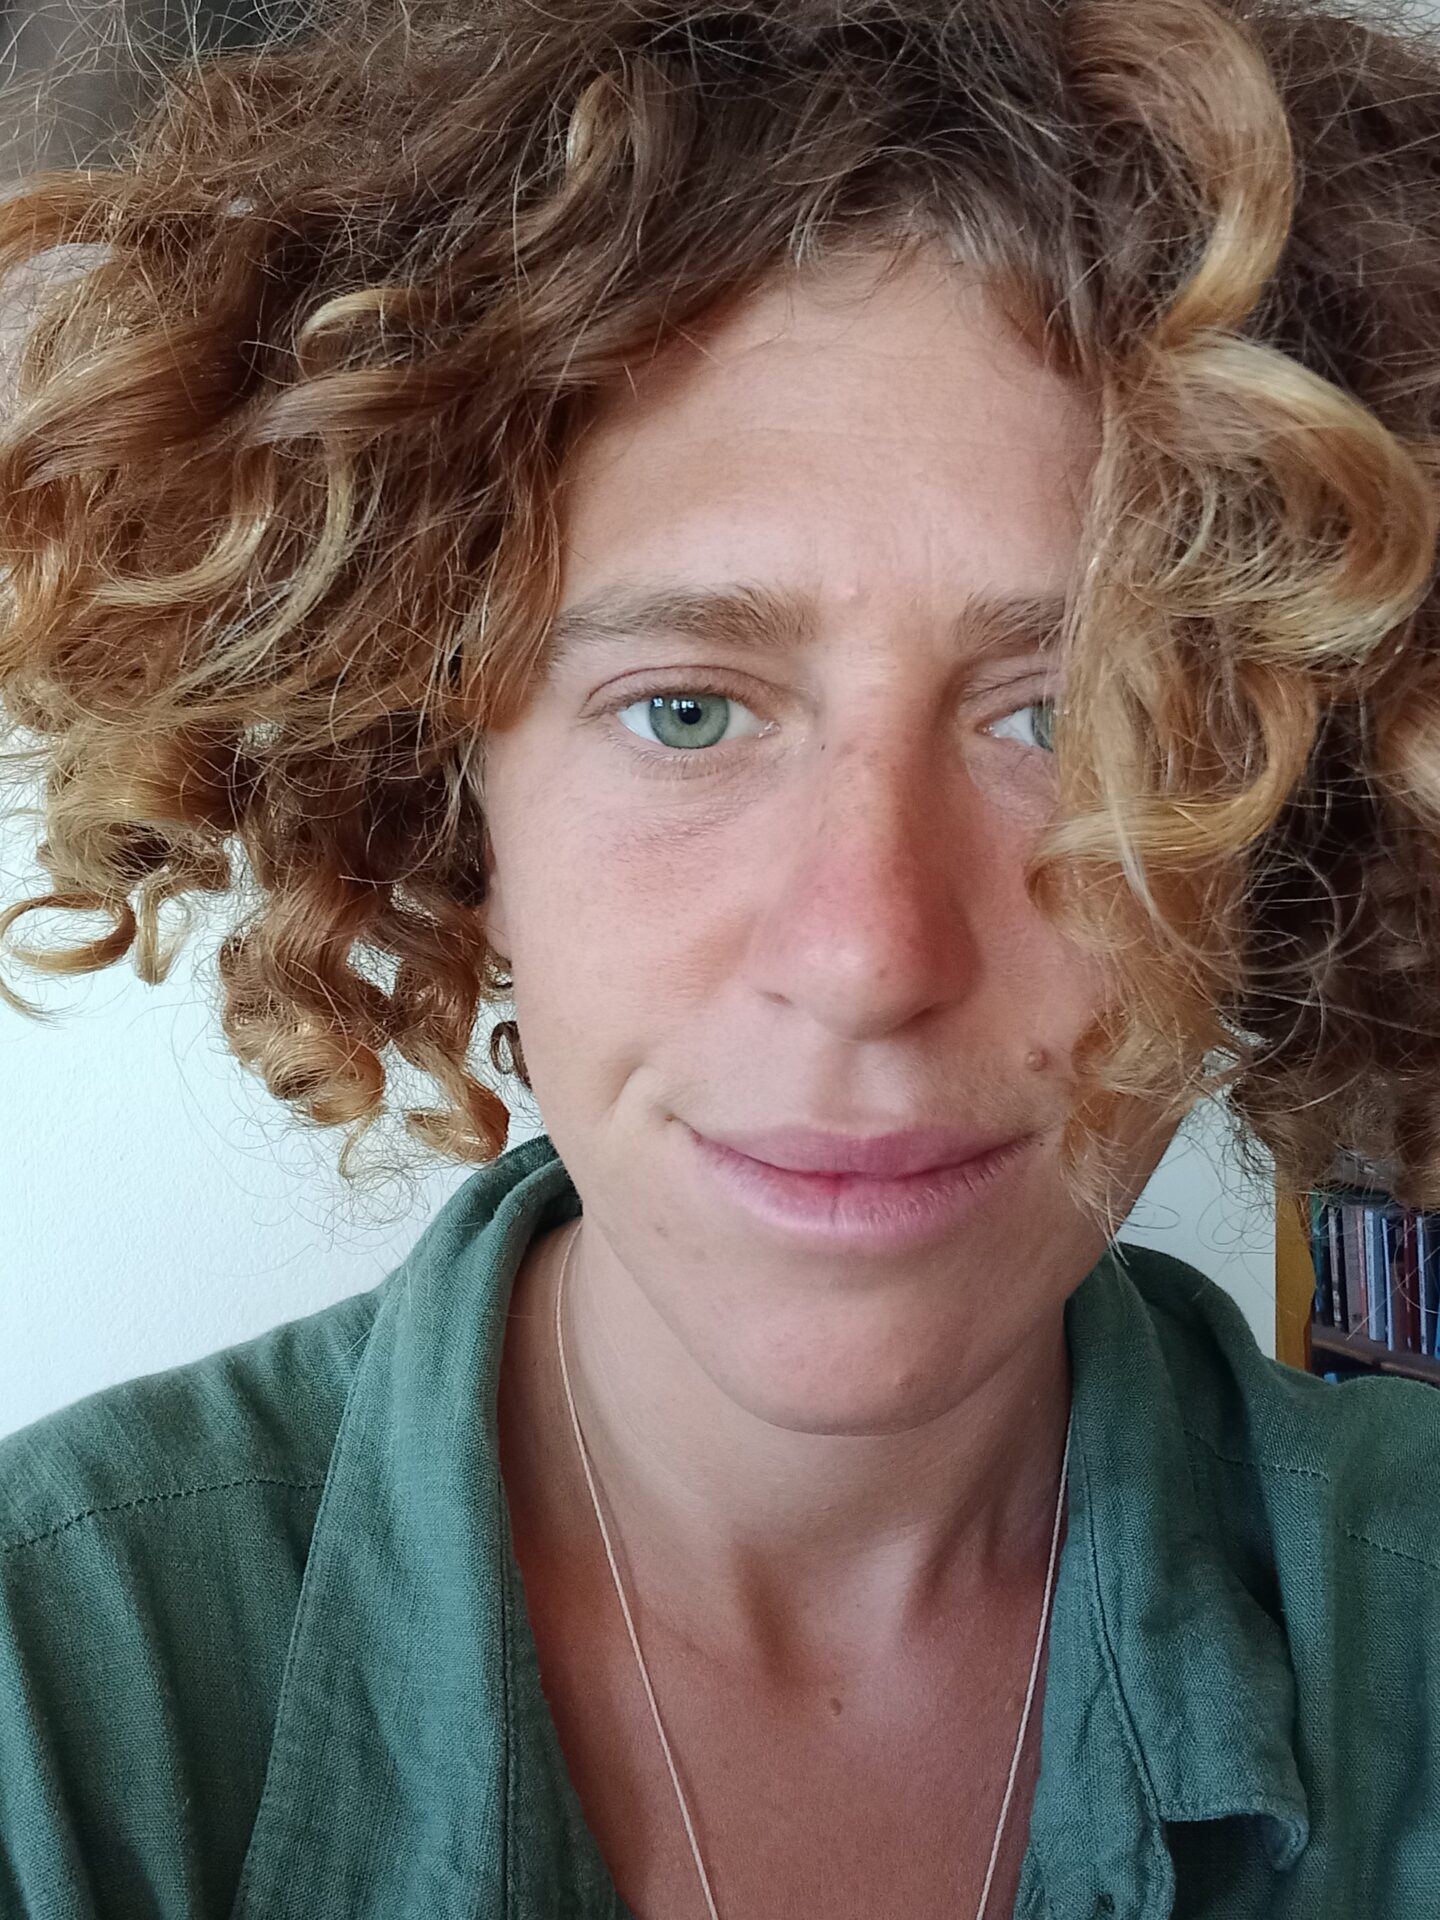 Portrait of a white woman with light brown curly hair, wearing a green shirt.